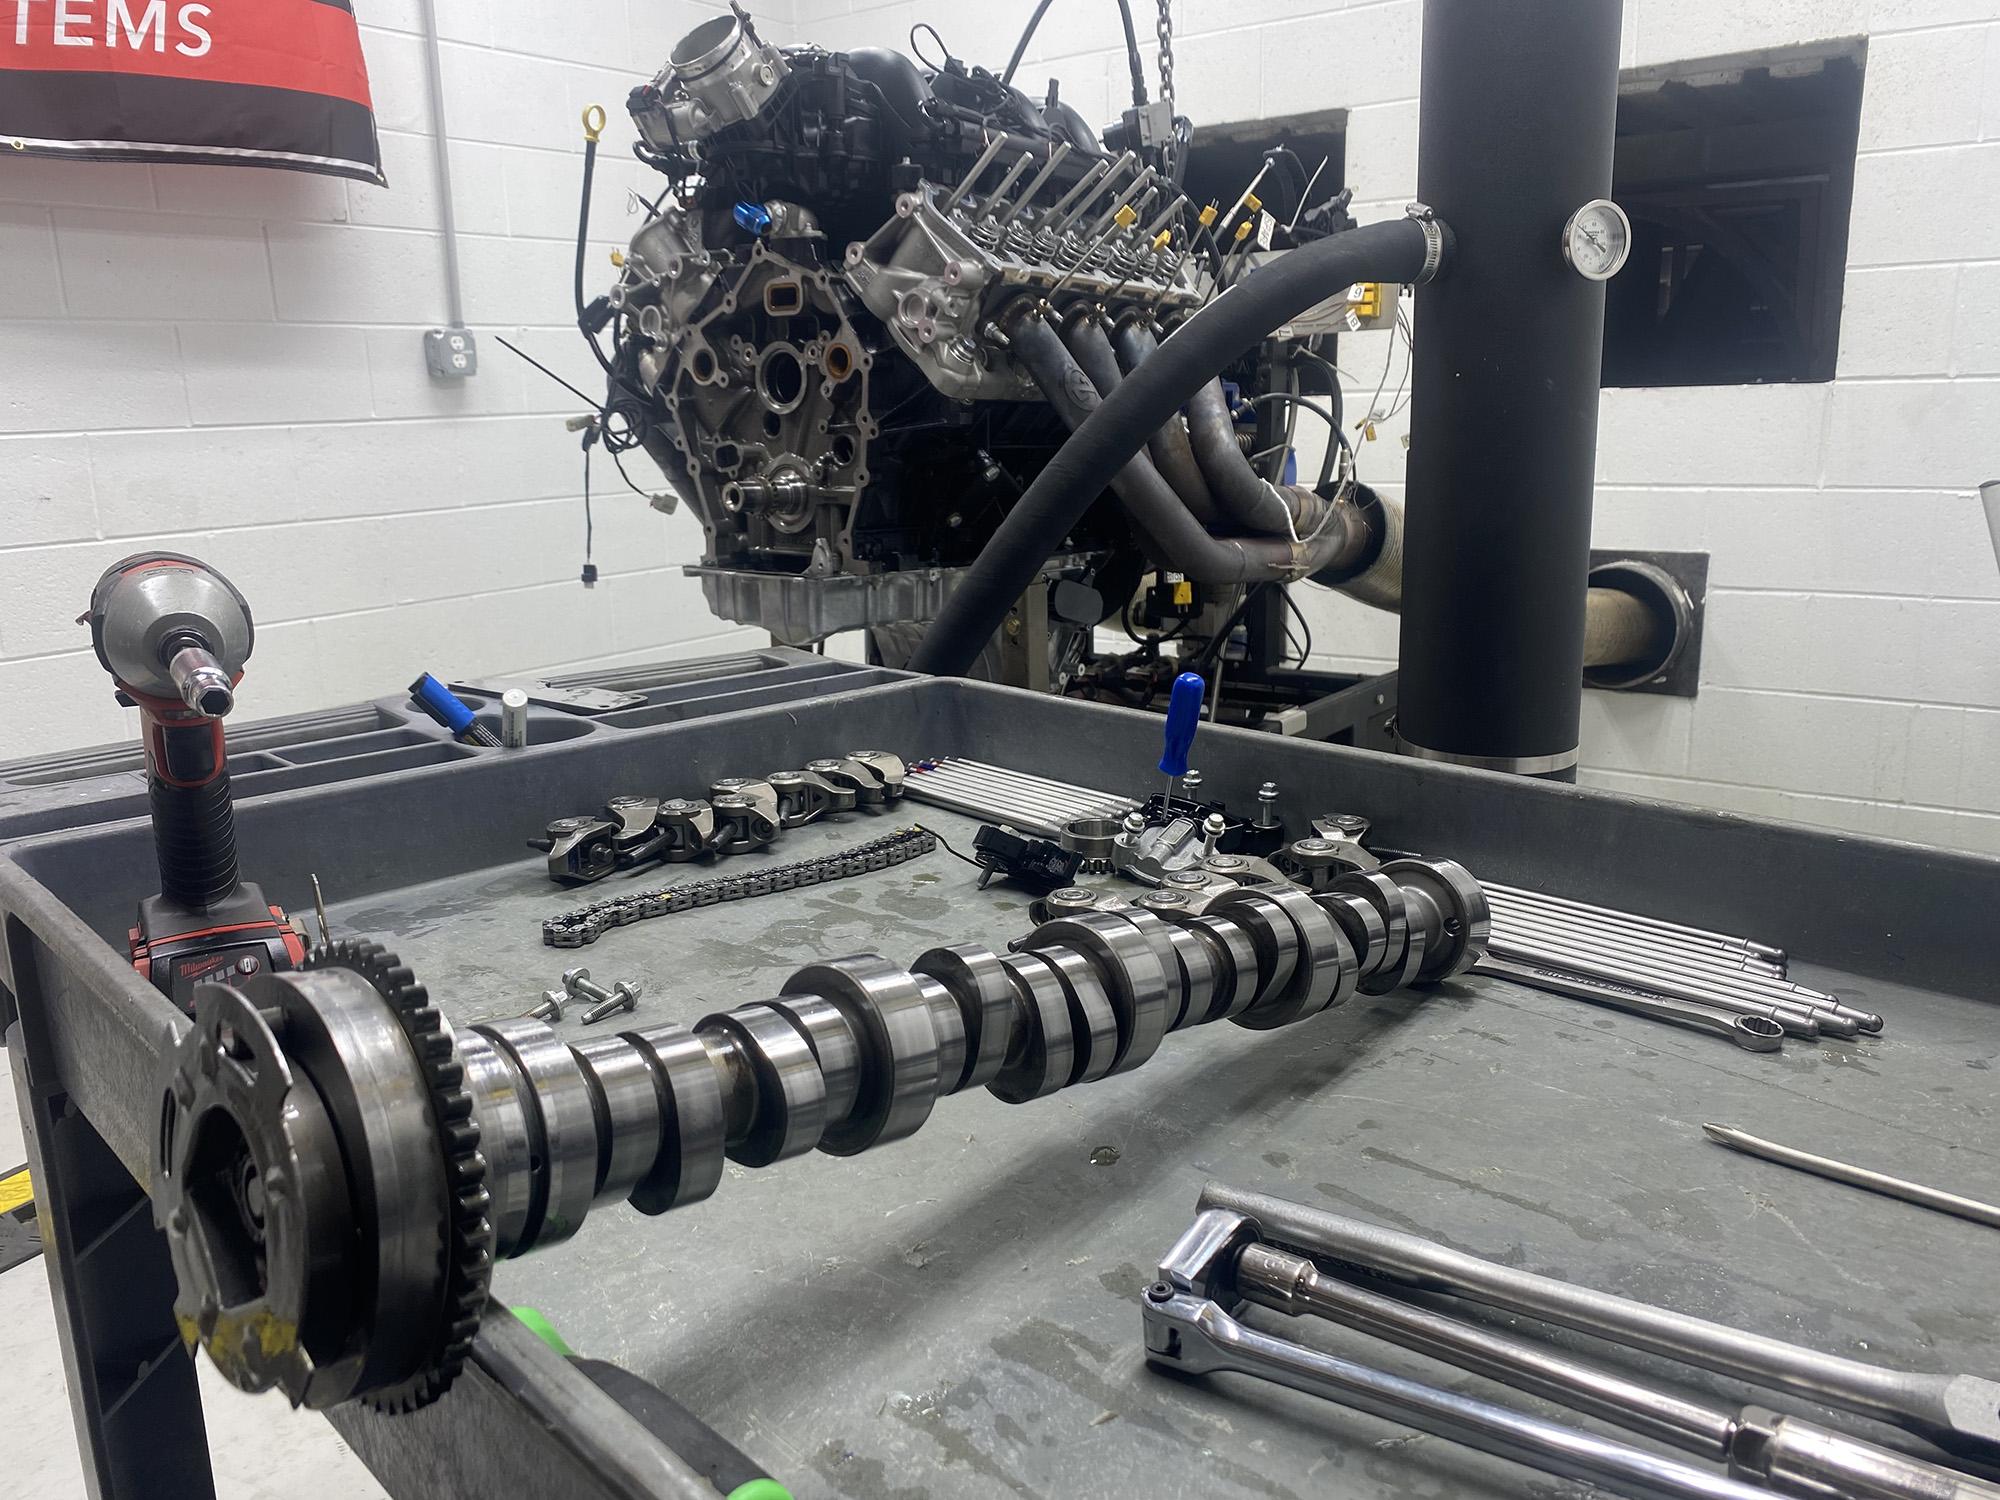 What to consider when selecting a high-performance camshaft